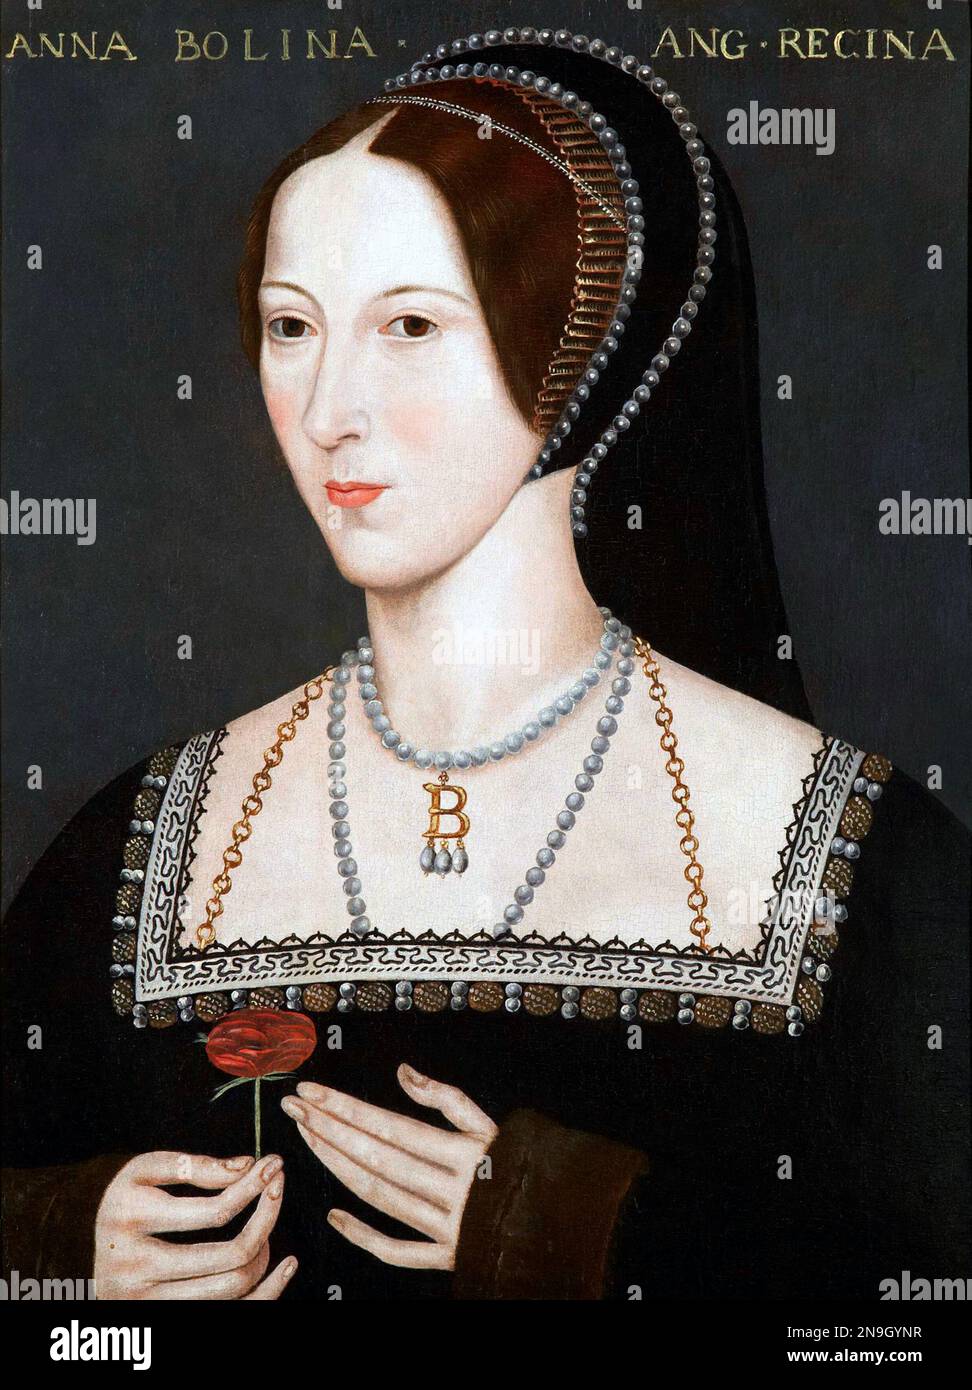 Anne Boleyn (/ˈbʊlɪn, bʊˈlɪn/;[7][8][9] c. 1501 or 1507 – 19 May 1536) was Queen of England from 1533 to 1536, as the second wife of King Henry VIII. The circumstances of her marriage and of her execution by beheading for treason and other charges made her a key figure in the political and religious upheaval that marked the start of the English Reformation. Anne was the daughter of Thomas Boleyn, 1st Earl of Wiltshire, and his wife, Lady Elizabeth Howard, and was educated in the Netherlands and France, largely as a maid of honour to Queen Claude of France. Stock Photo